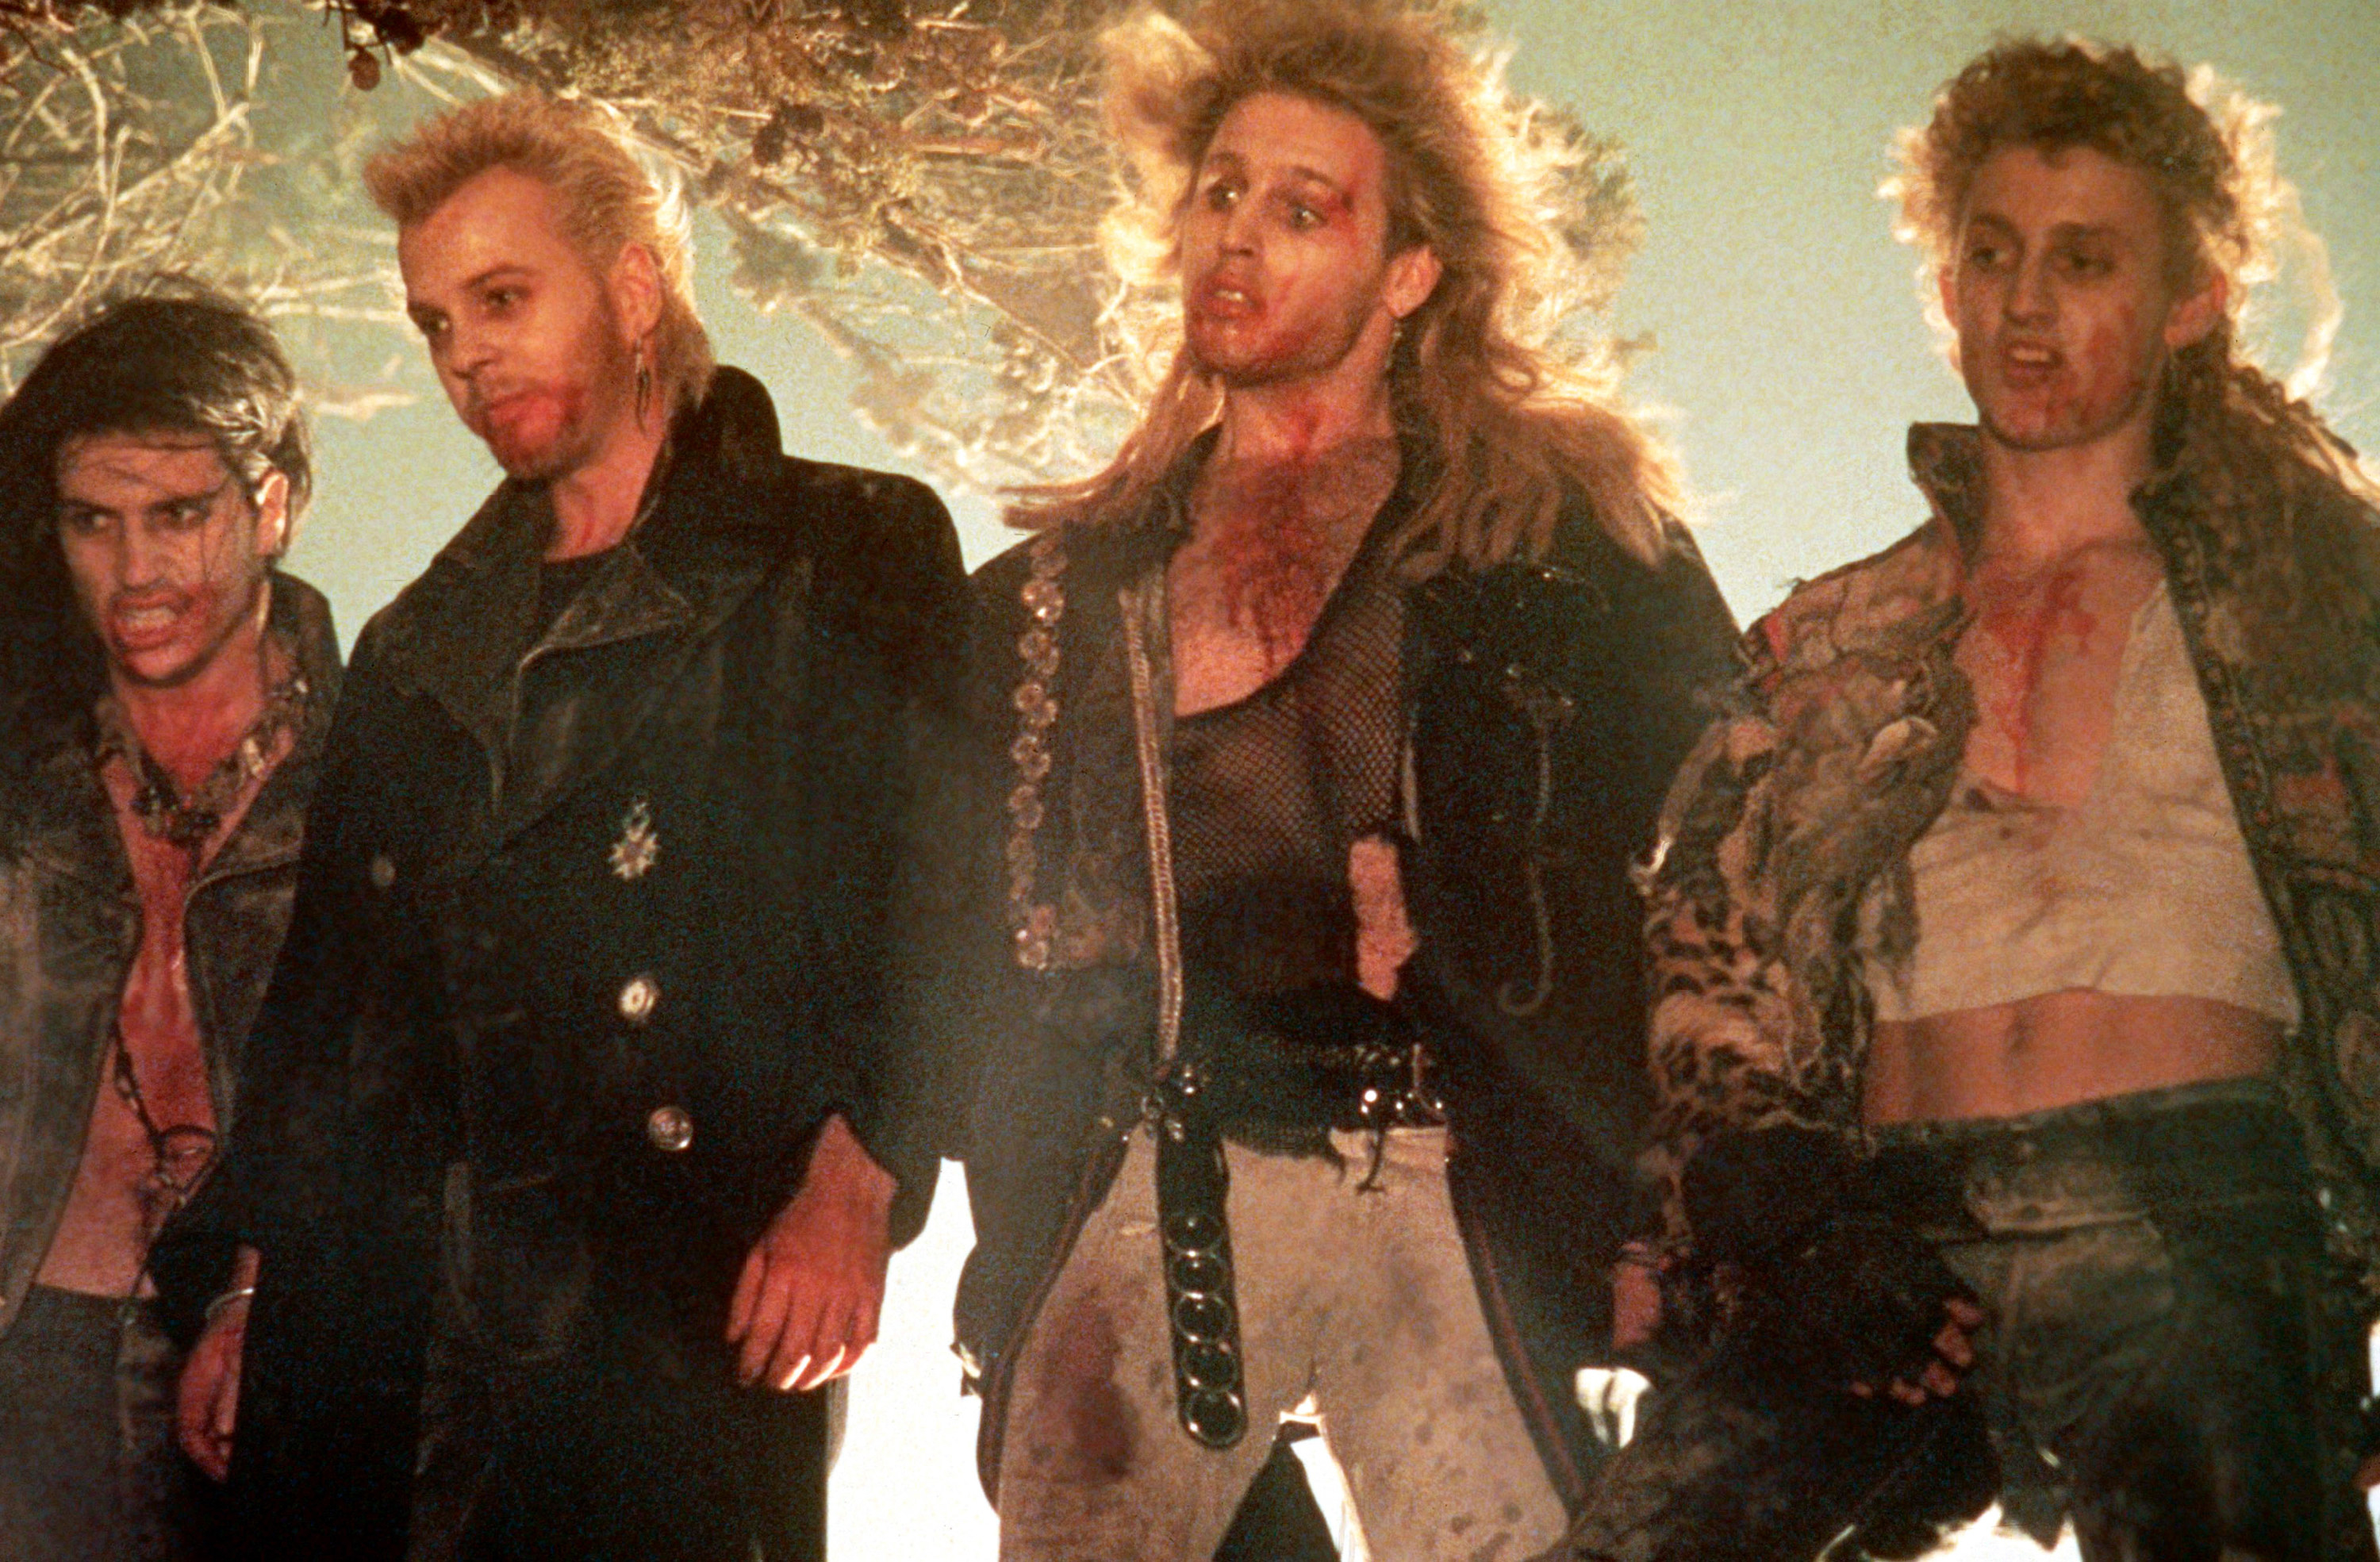 Billy Wirth, Kiefer Sutherland, Brooke McCarter and Alex Winter in The Lost Boys